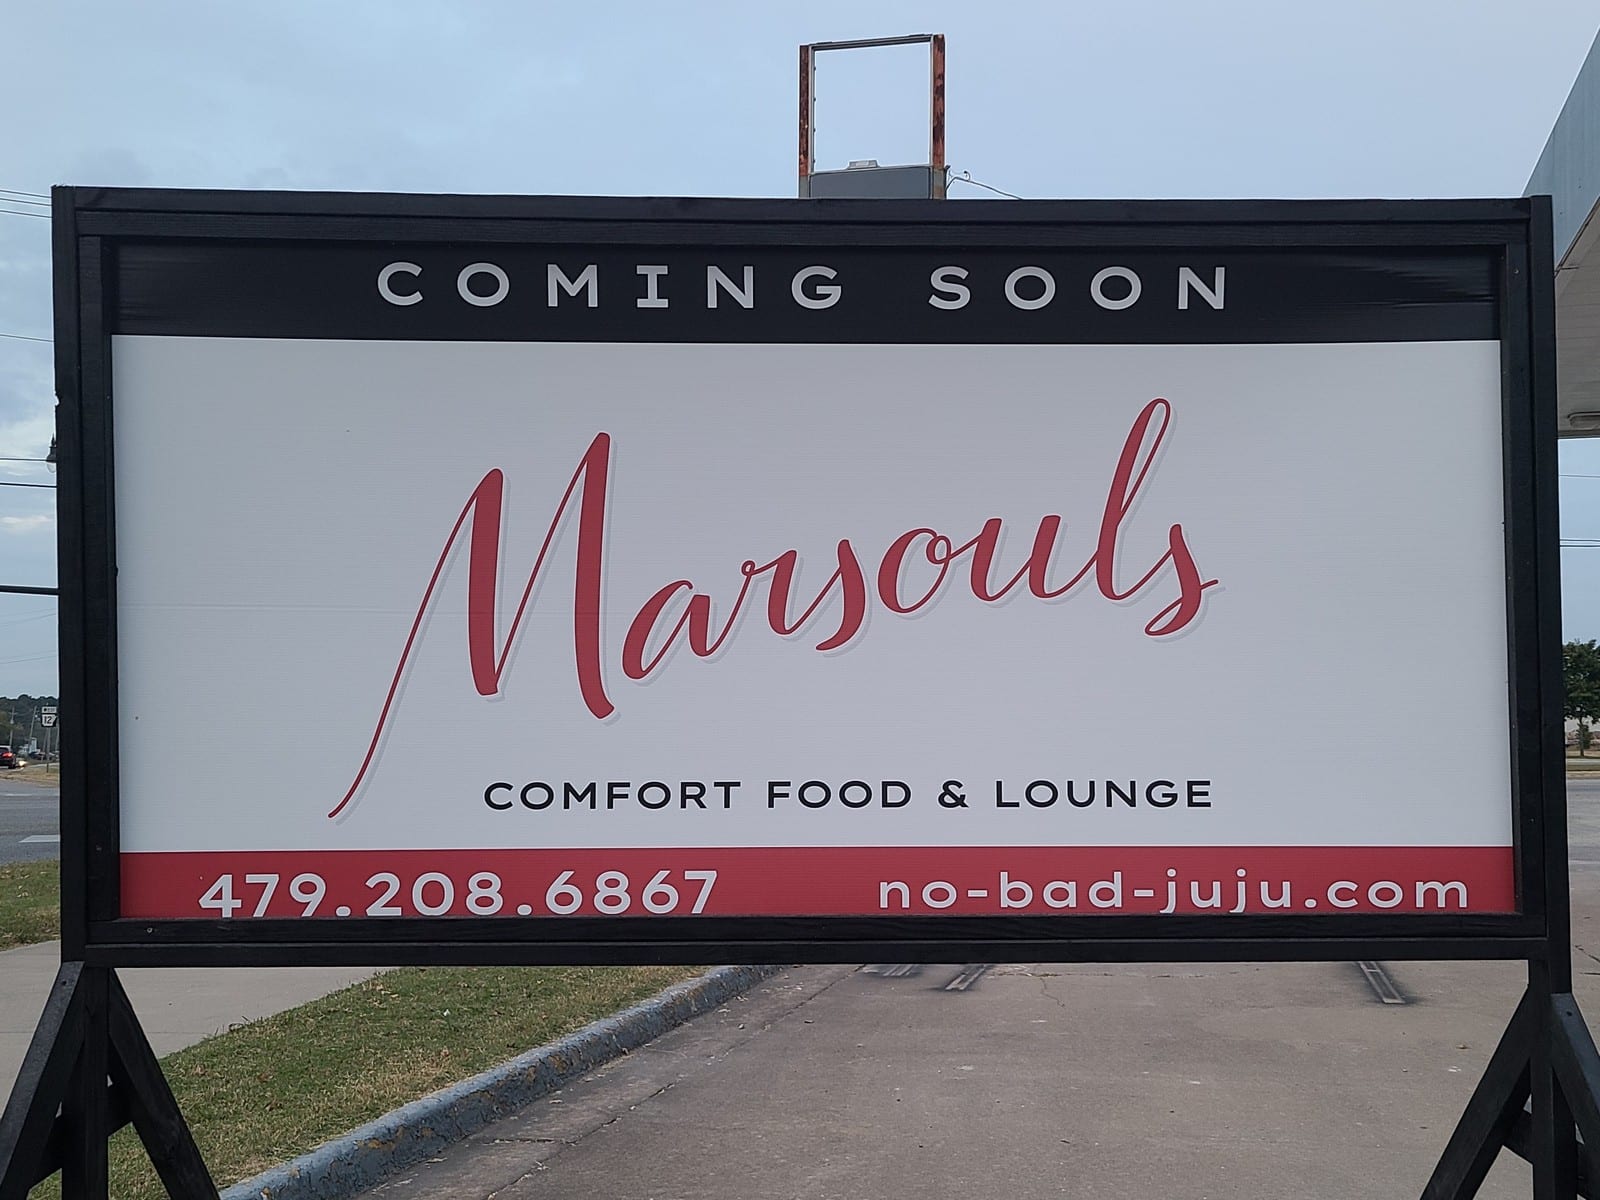 Marsouls - Downtown Rogers